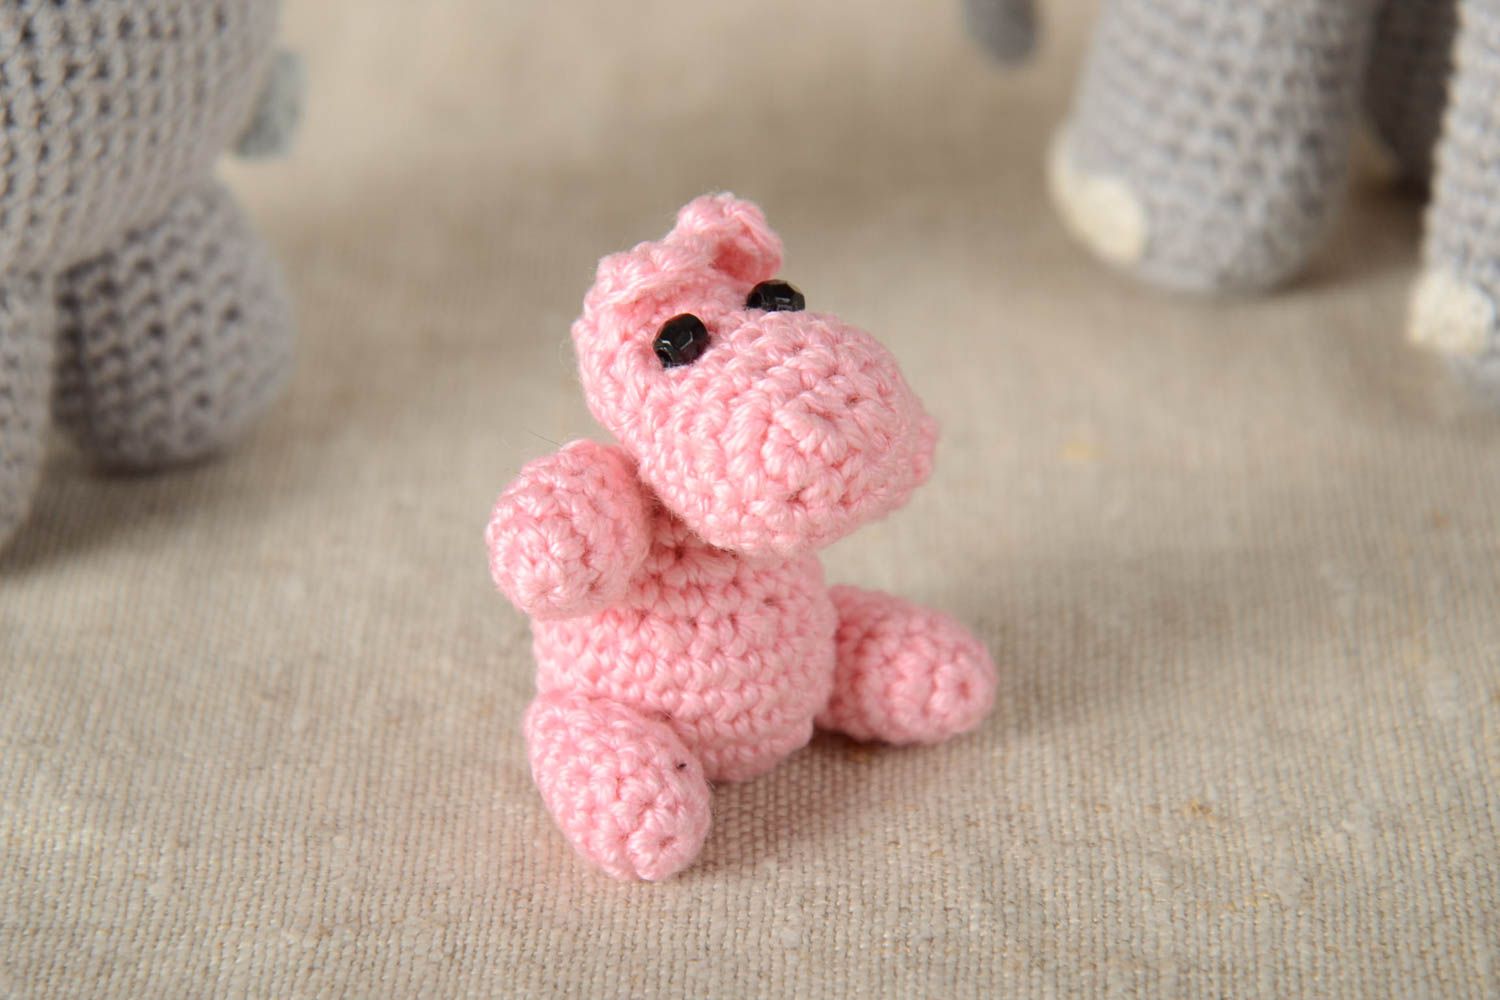 Crocheted pink soft toy unusual present for kids handmade toys cute gift photo 1